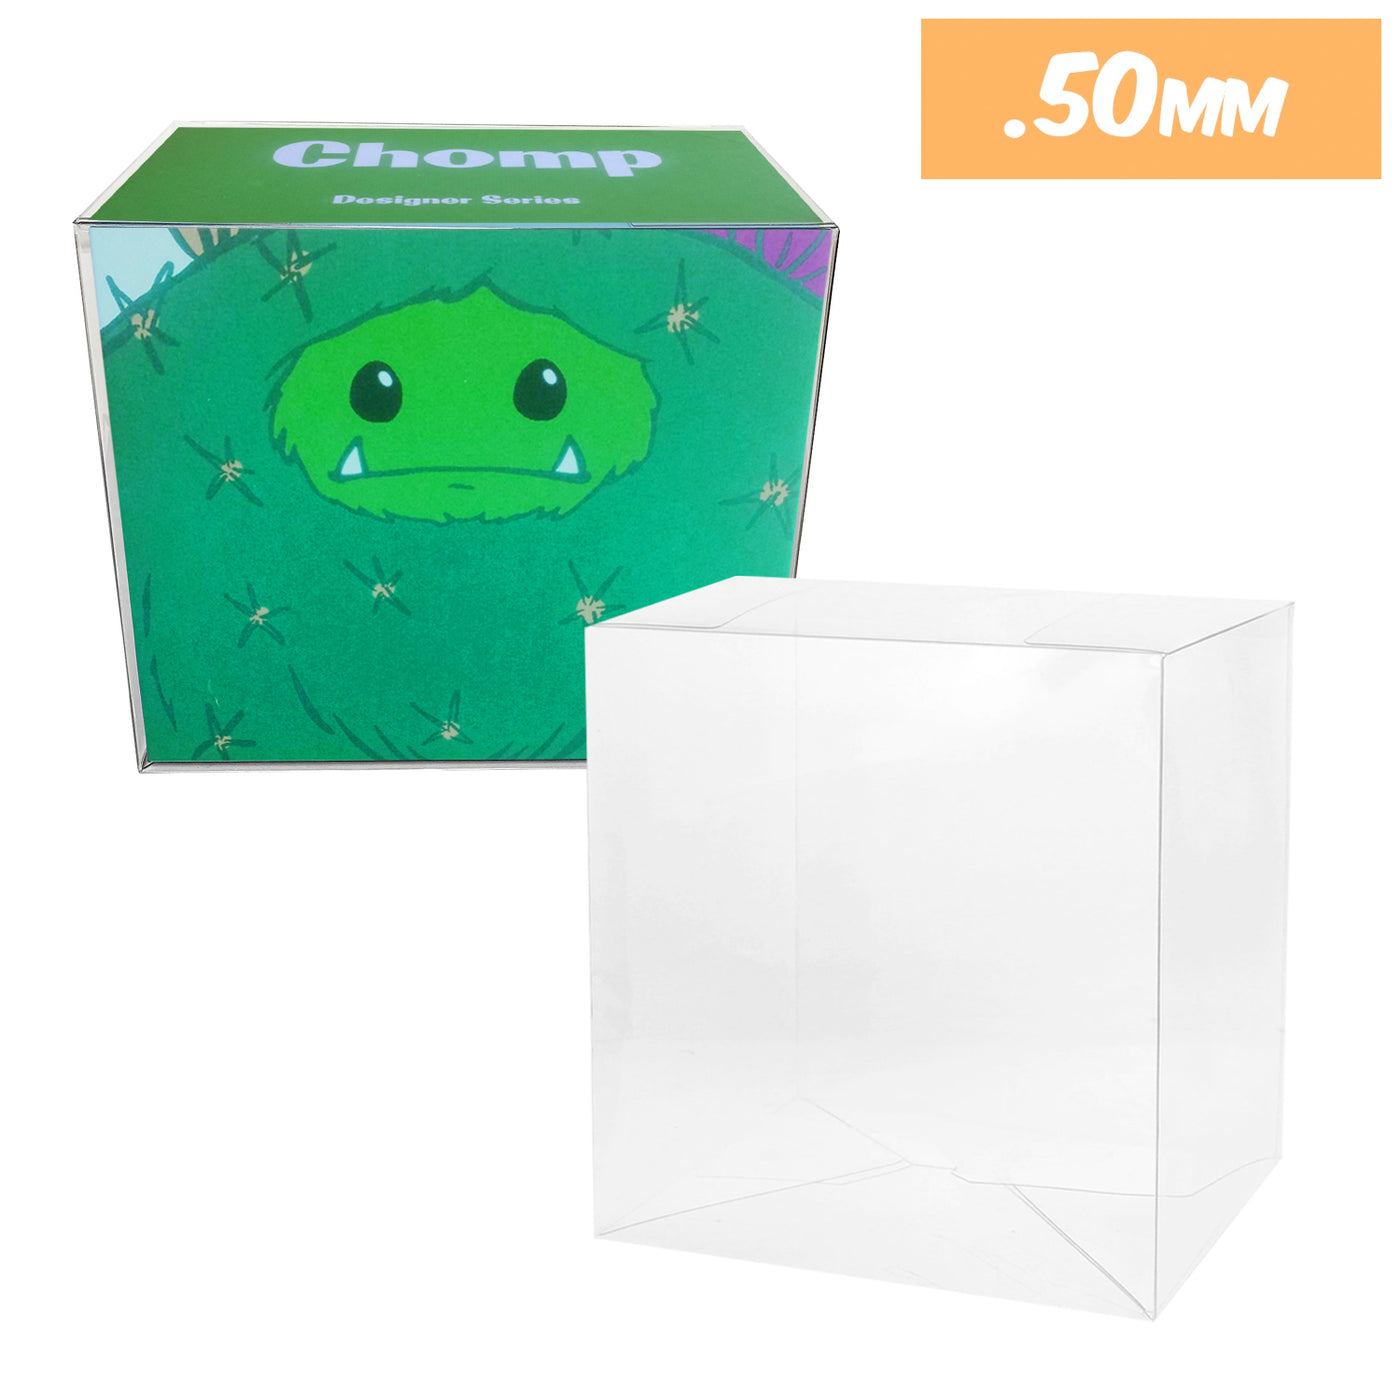 CHOMP CACTUS Protectors for Abominable Toys Vinyl Collectible Figures (50mm thick) 7h x 7w x 4.25d